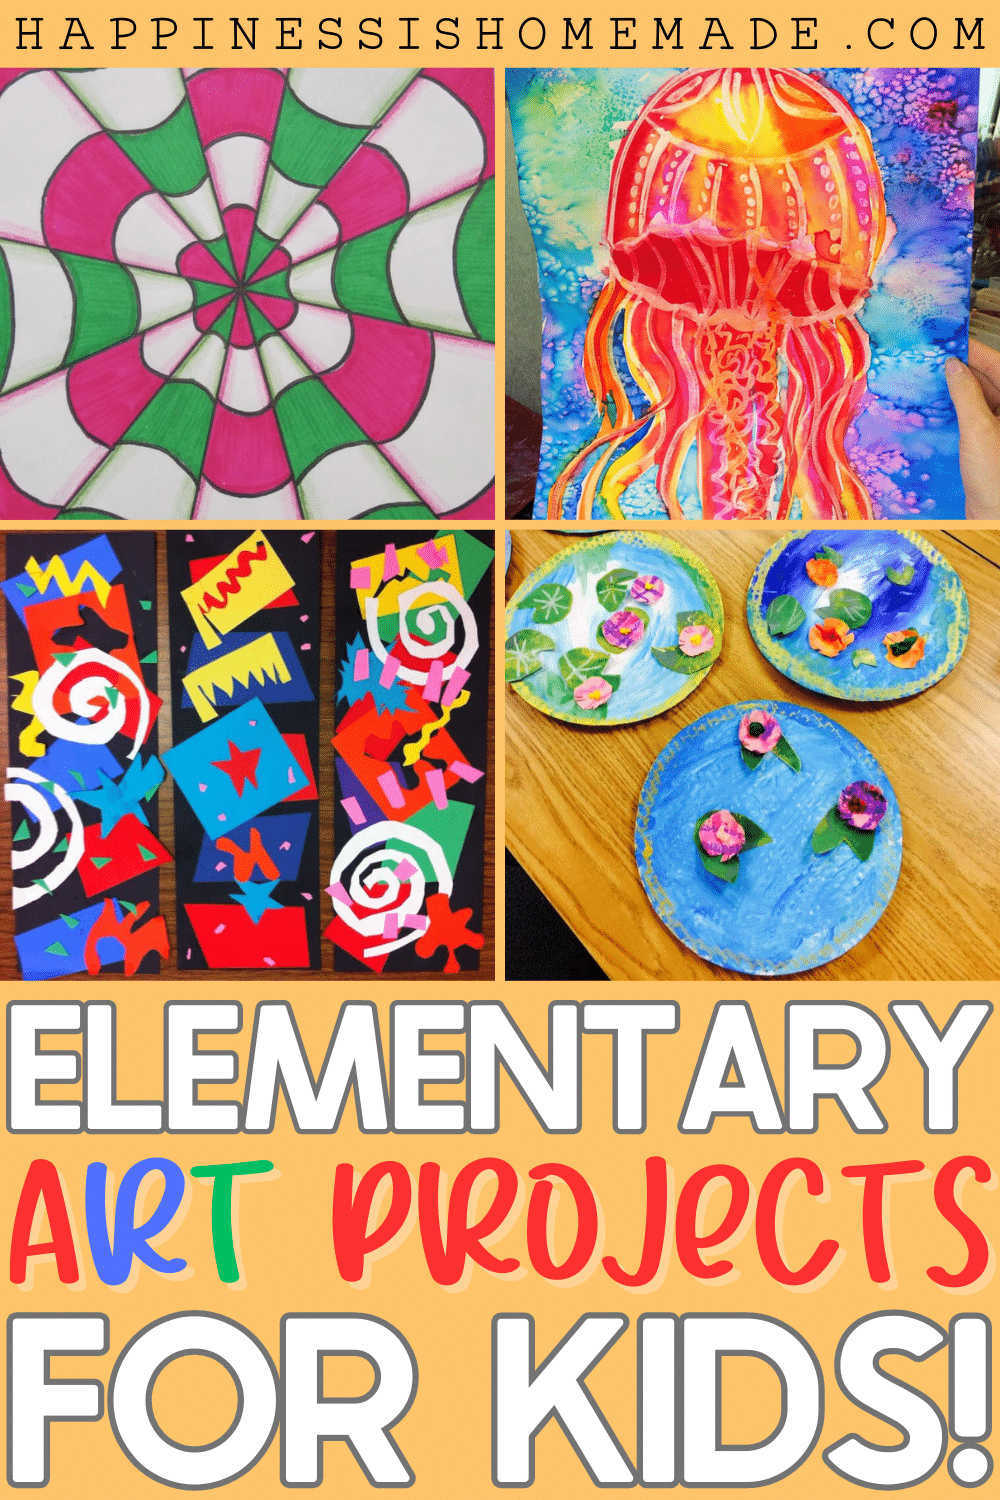 Elementary Art projects for kids pin graphic